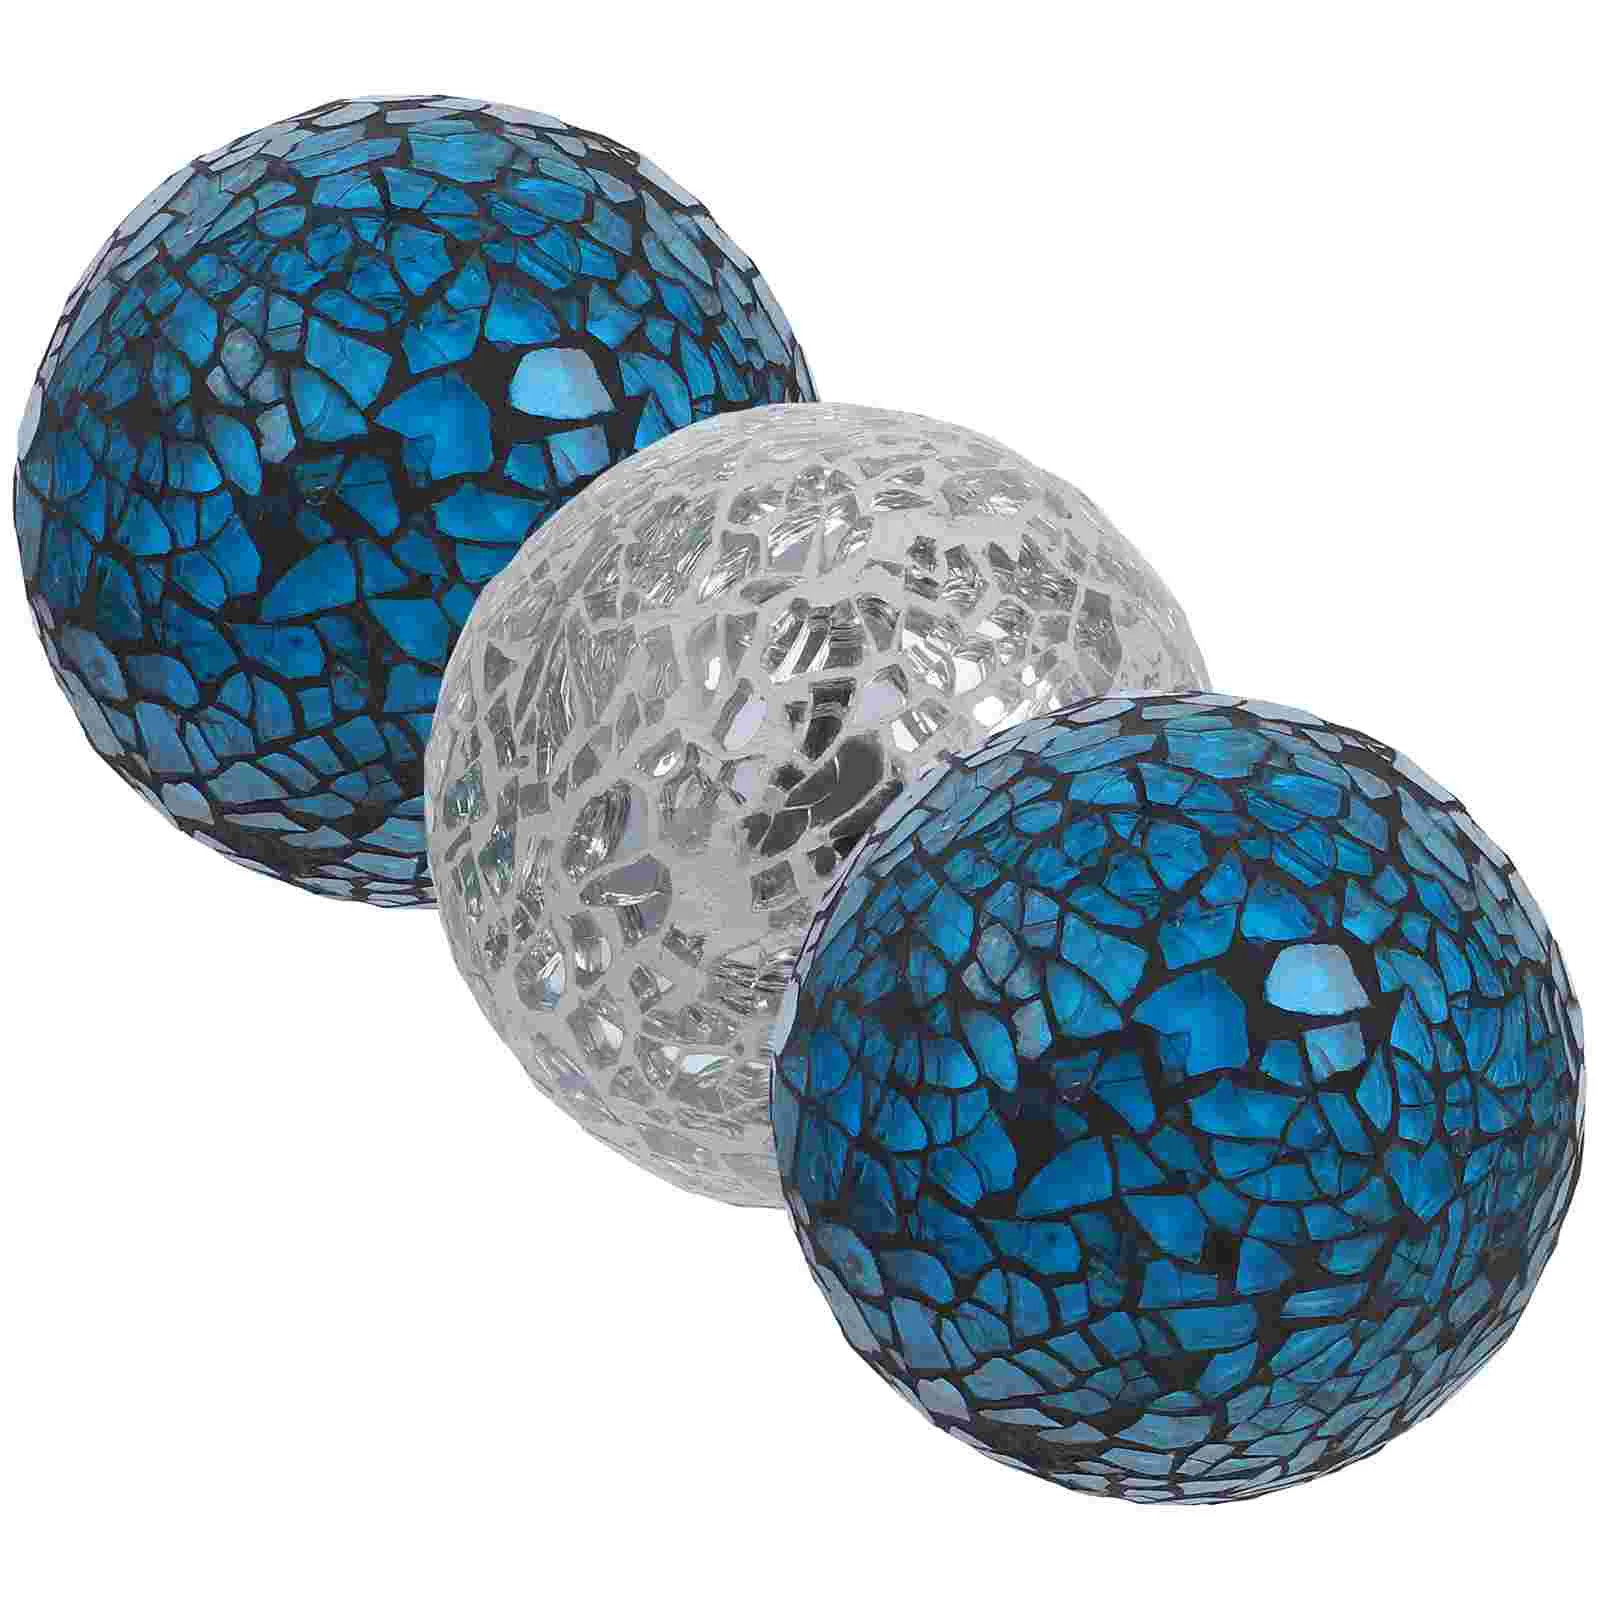 

3 Pcs Cracked Glass Ball Flower Vases Party Props Decorative Bowl Balls Mosaic Gift Foam Office Sphere Round Decoration